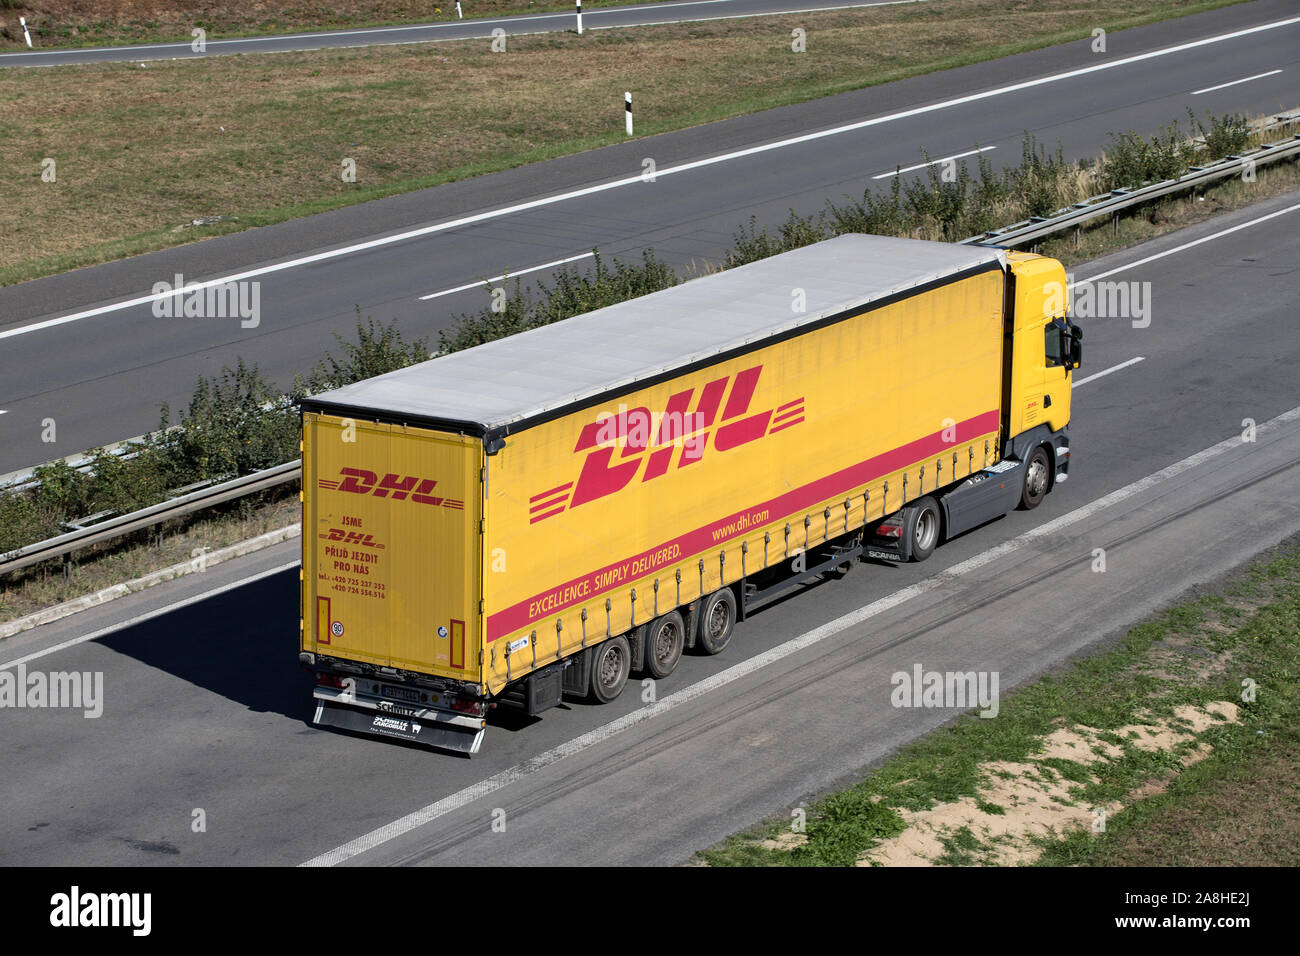 DHL truck with curtainside trailer on motorway. Stock Photo